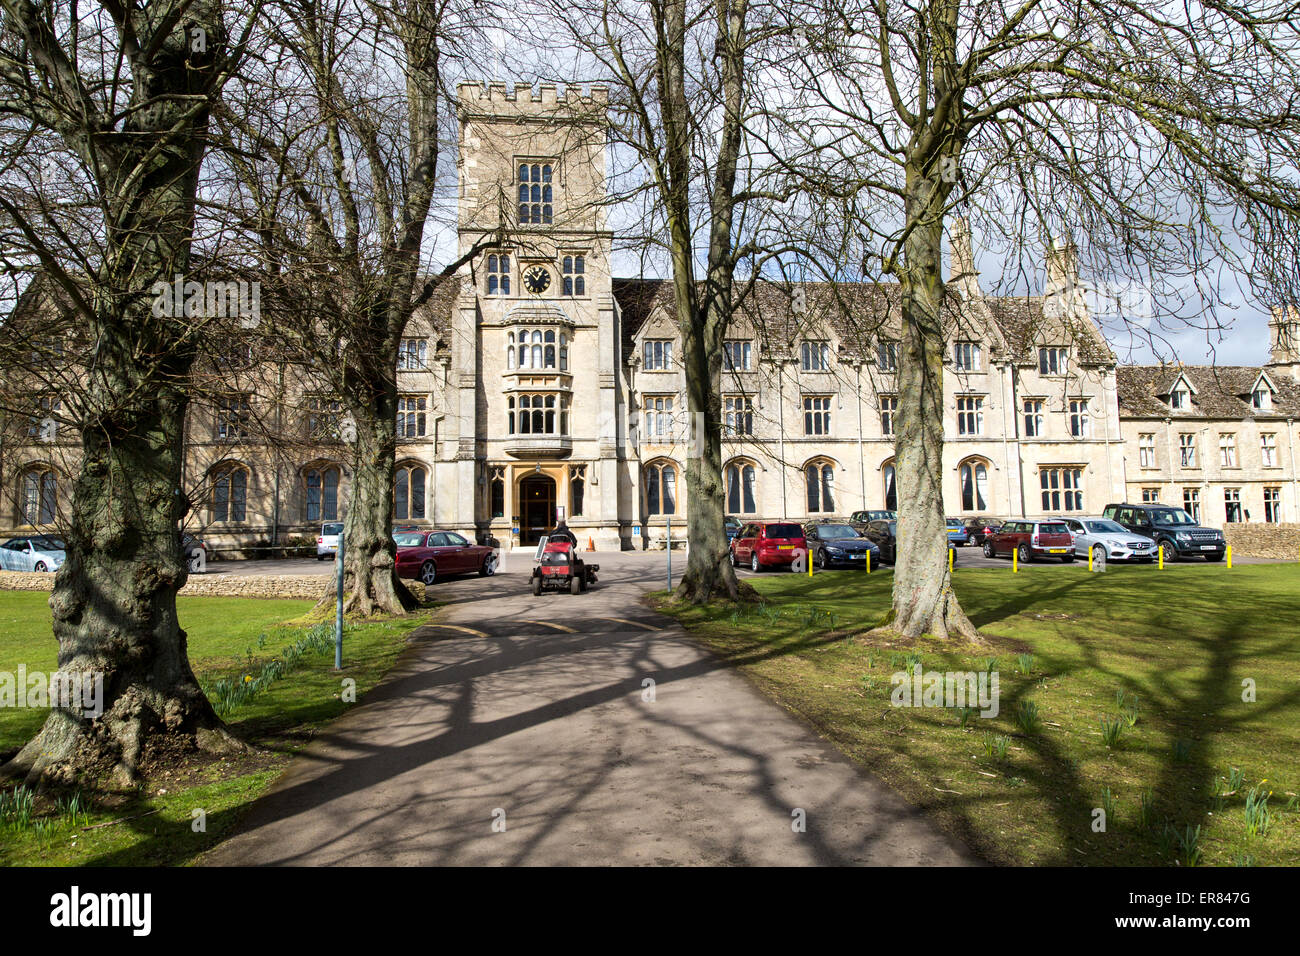 Royal Agricultural University college, Cirencester, Gloucestershire, England, UK Stock Photo